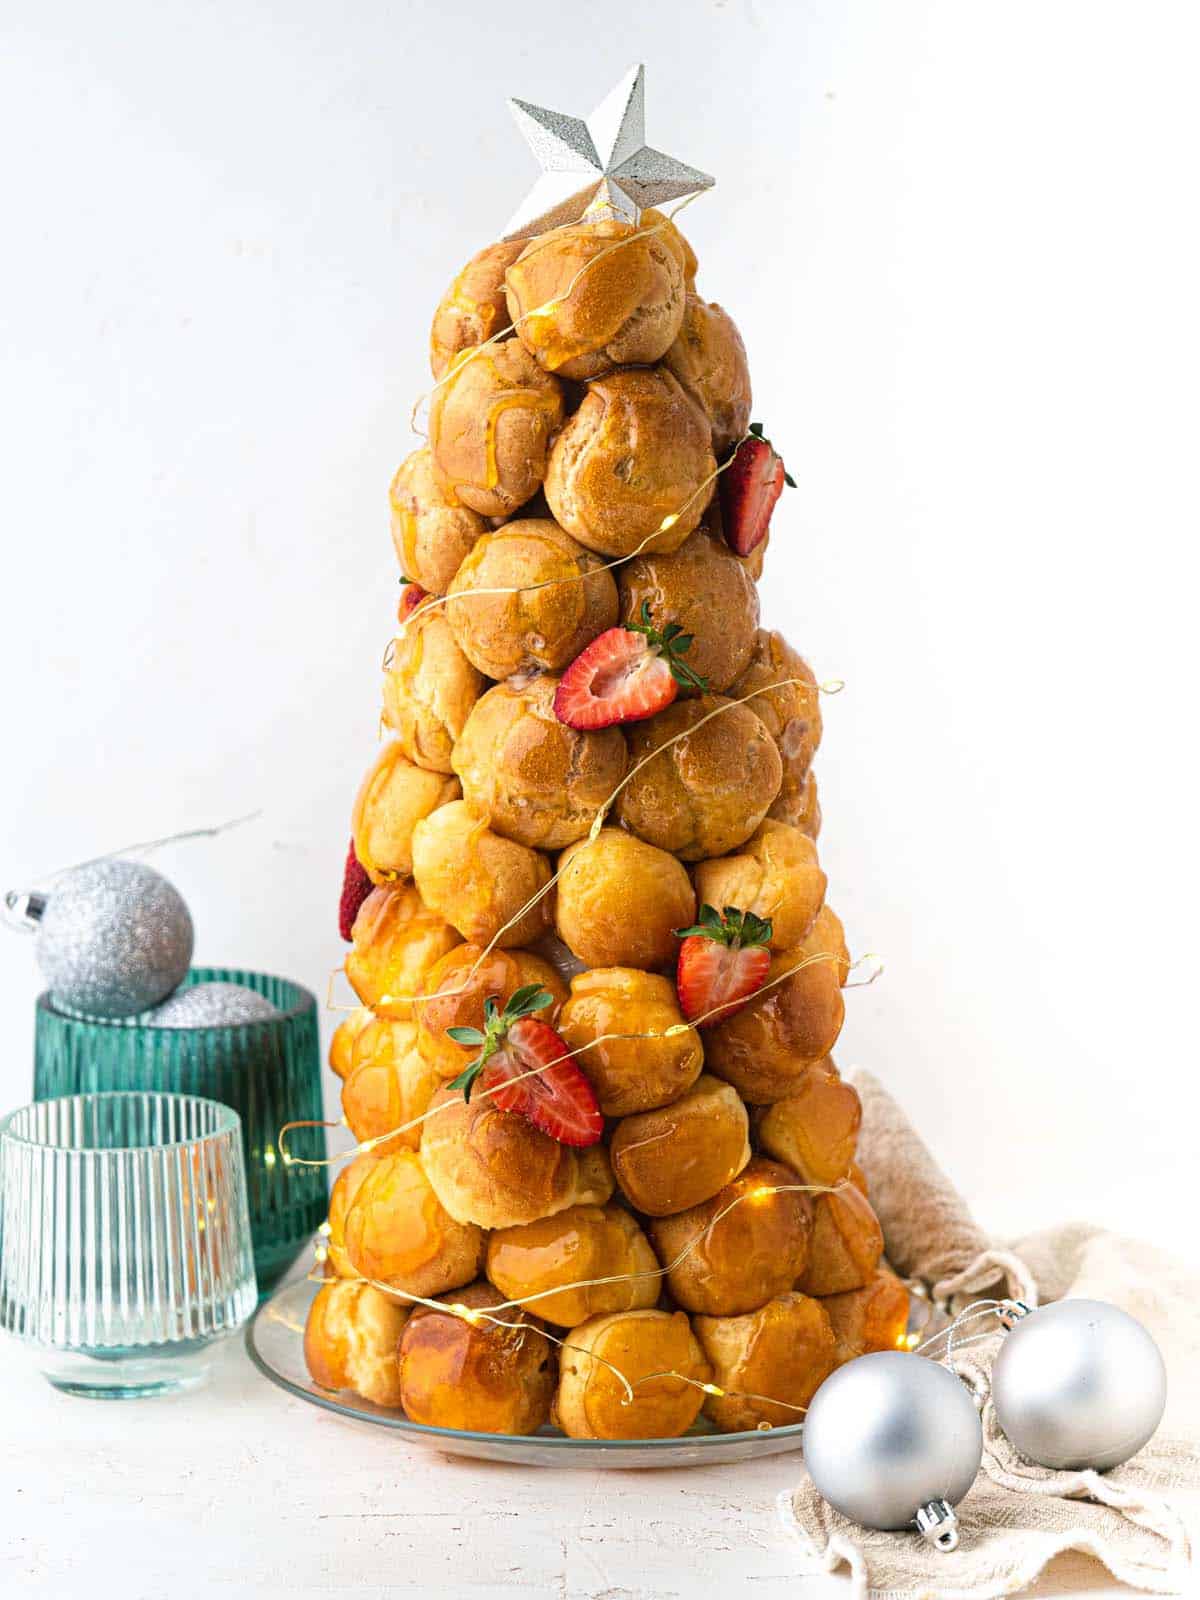 croquembouche with cream puffs filled with pastry cream and topped with caramel